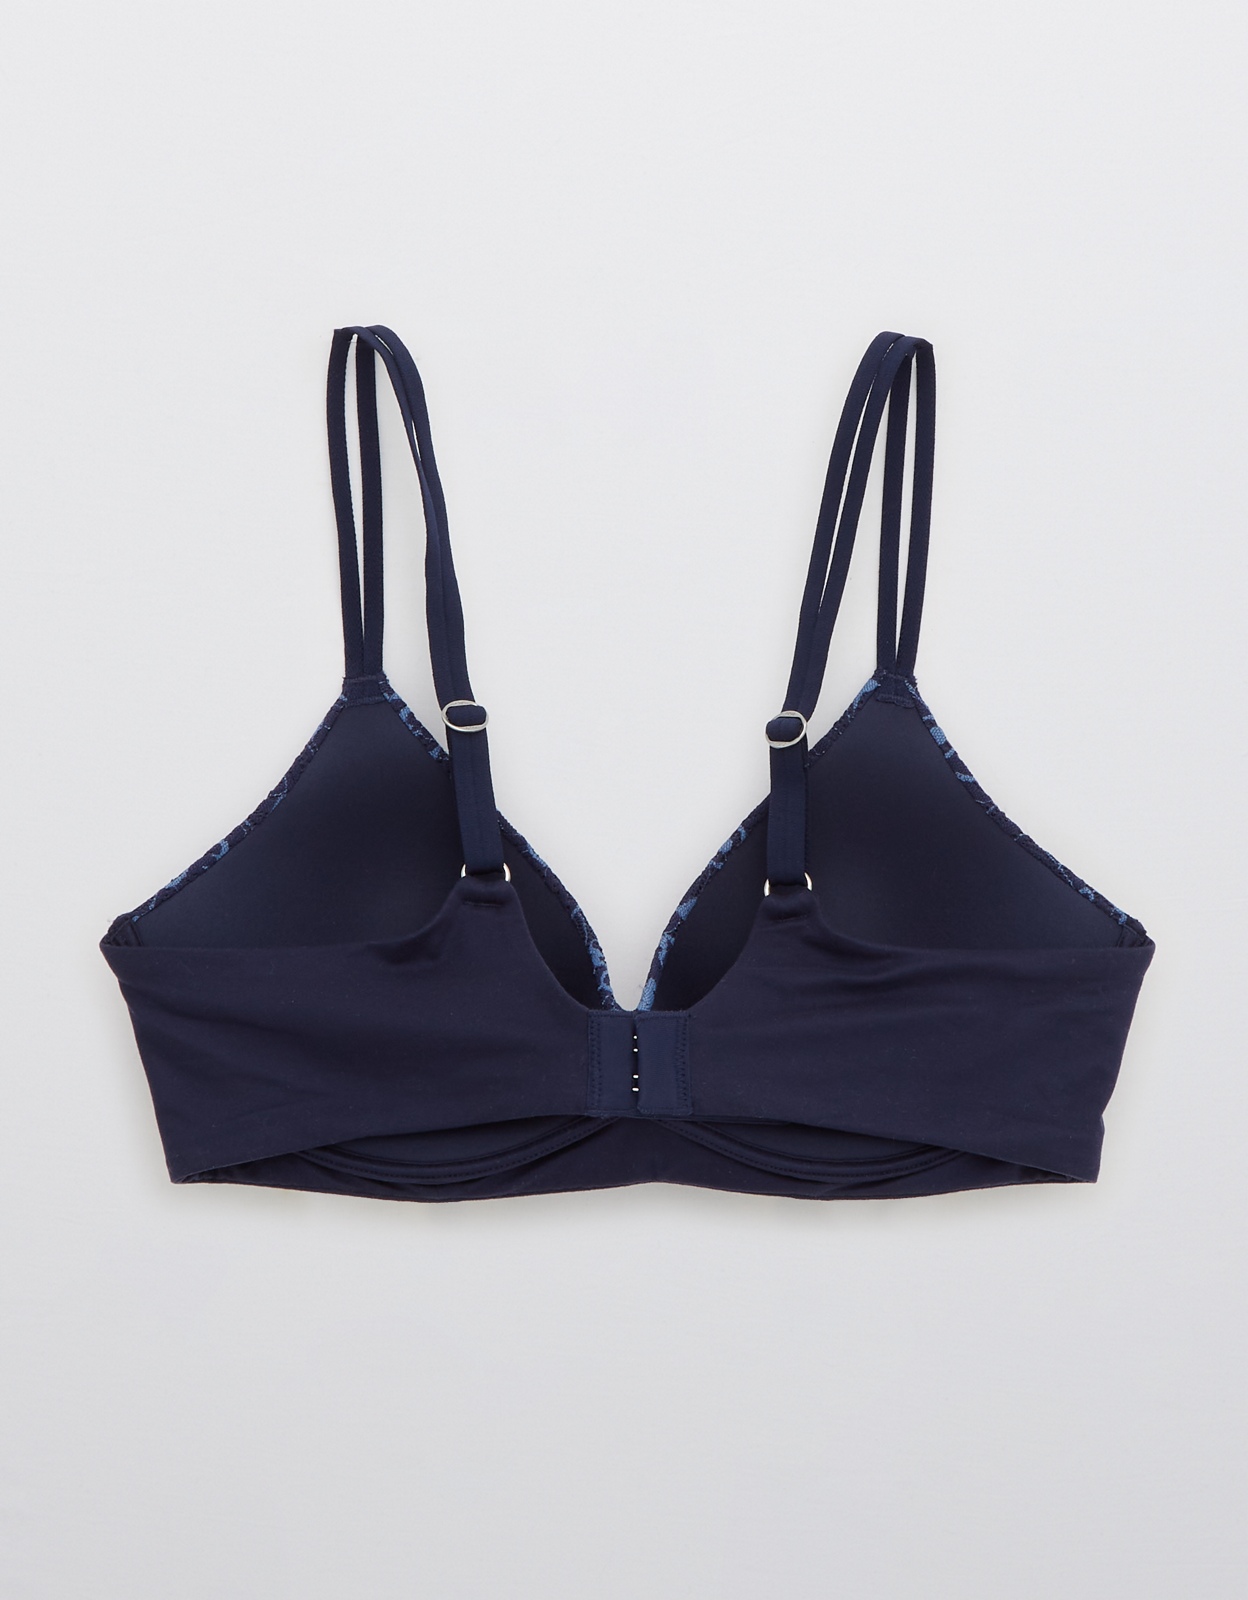 Navy blue lace Aerie bra with padding and under wire